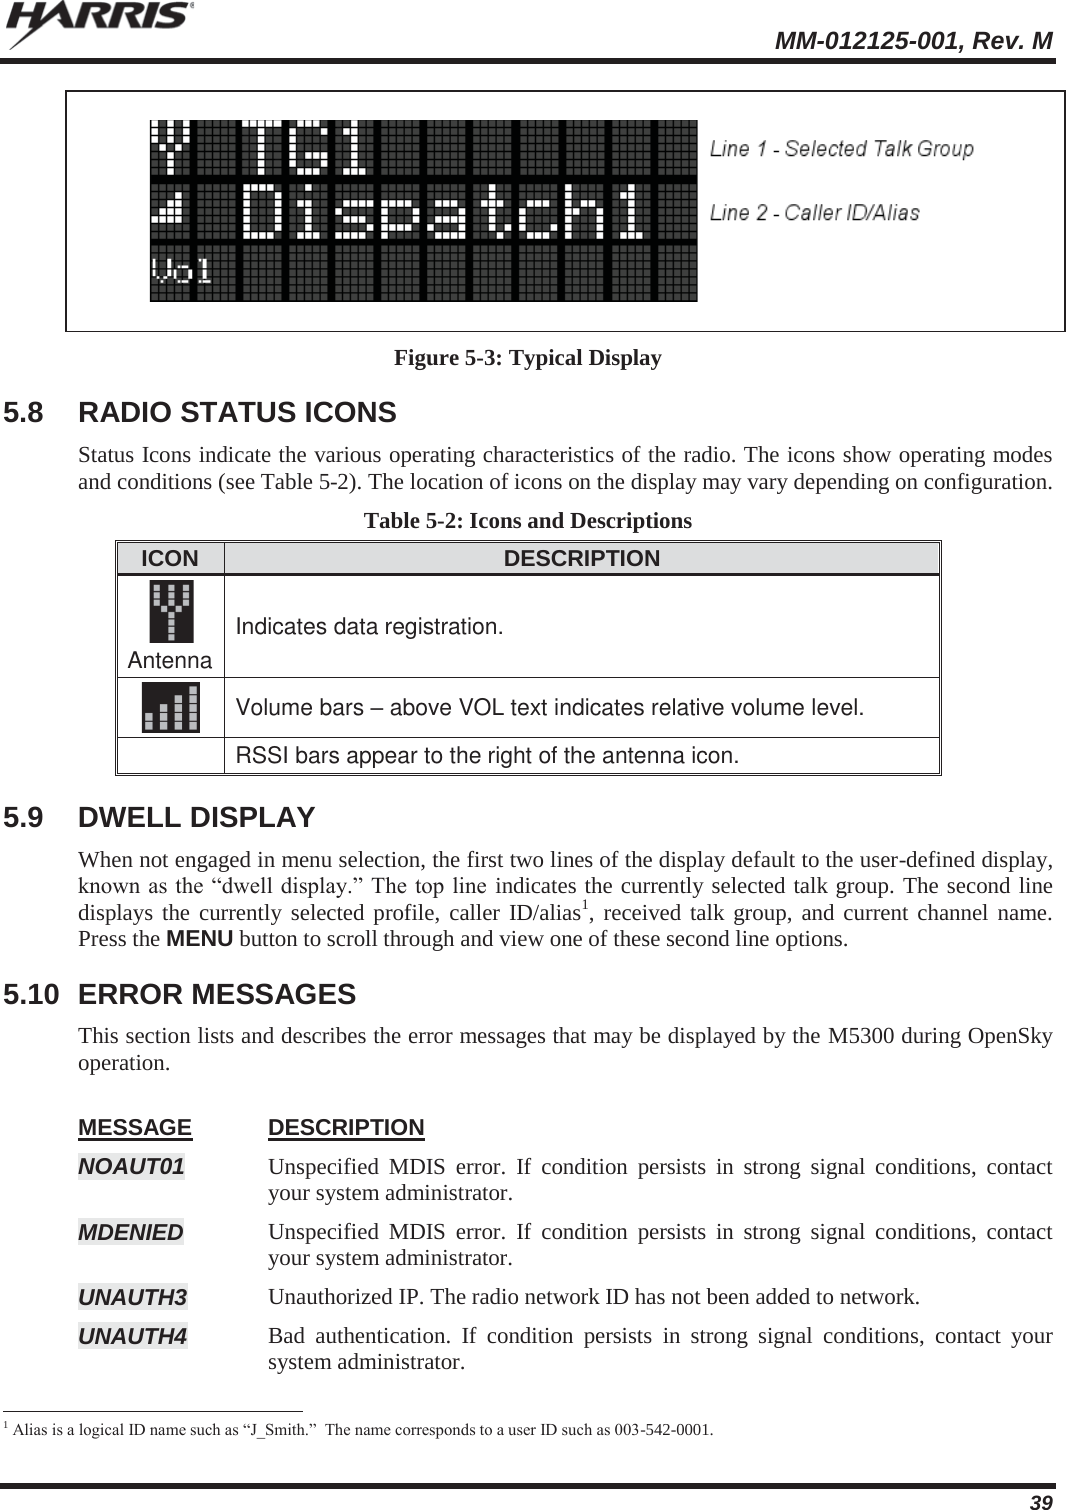  MM-012125-001, Rev. M 39    Figure 5-3: Typical Display 5.8  RADIO STATUS ICONS Status Icons indicate the various operating characteristics of the radio. The icons show operating modes and conditions (see Table 5-2). The location of icons on the display may vary depending on configuration. Table 5-2: Icons and Descriptions ICON DESCRIPTION  Antenna Indicates data registration.  Volume bars – above VOL text indicates relative volume level.  RSSI bars appear to the right of the antenna icon. 5.9 DWELL DISPLAY When not engaged in menu selection, the first two lines of the display default to the user-defined display, known as the “dwell display.” The top line indicates the currently selected talk group. The second line displays the currently selected profile, caller ID/alias1, received talk group, and current channel name. Press the MENU button to scroll through and view one of these second line options.  5.10 ERROR MESSAGES This section lists and describes the error messages that may be displayed by the M5300 during OpenSky operation.  MESSAGE DESCRIPTION NOAUT01 Unspecified MDIS error. If condition persists in strong signal conditions, contact your system administrator. MDENIED  Unspecified MDIS error. If condition persists in strong signal conditions, contact your system administrator. UNAUTH3 Unauthorized IP. The radio network ID has not been added to network. UNAUTH4 Bad authentication. If condition persists in strong signal conditions, contact your system administrator.                                                            1 Alias is a logical ID name such as “J_Smith.”  The name corresponds to a user ID such as 003-542-0001. 